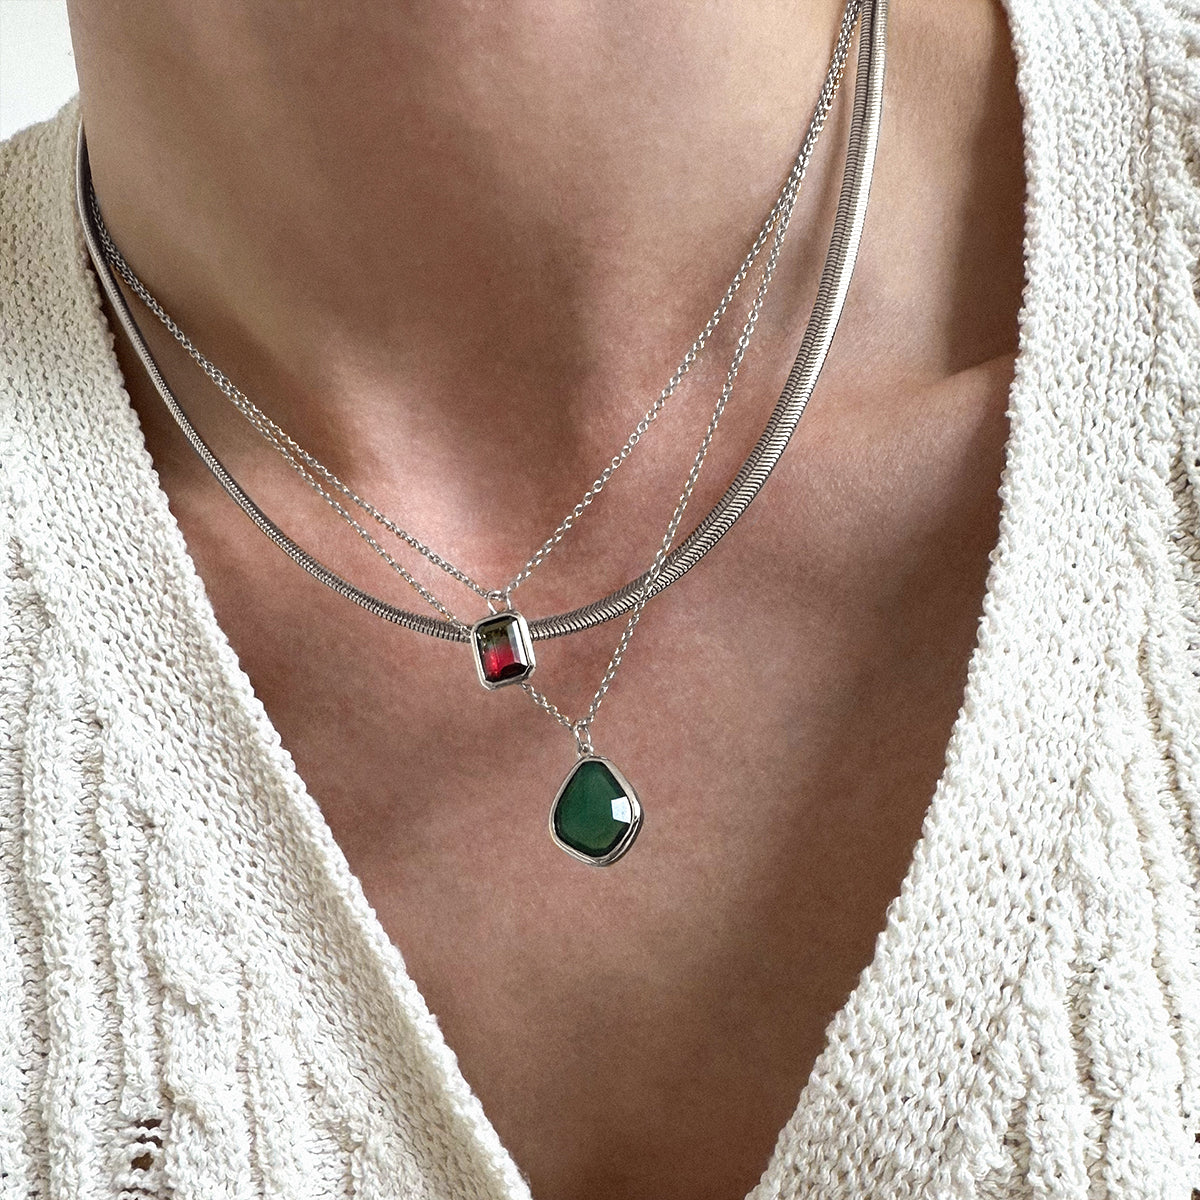 Green Agate Charm Necklace Silver Plated